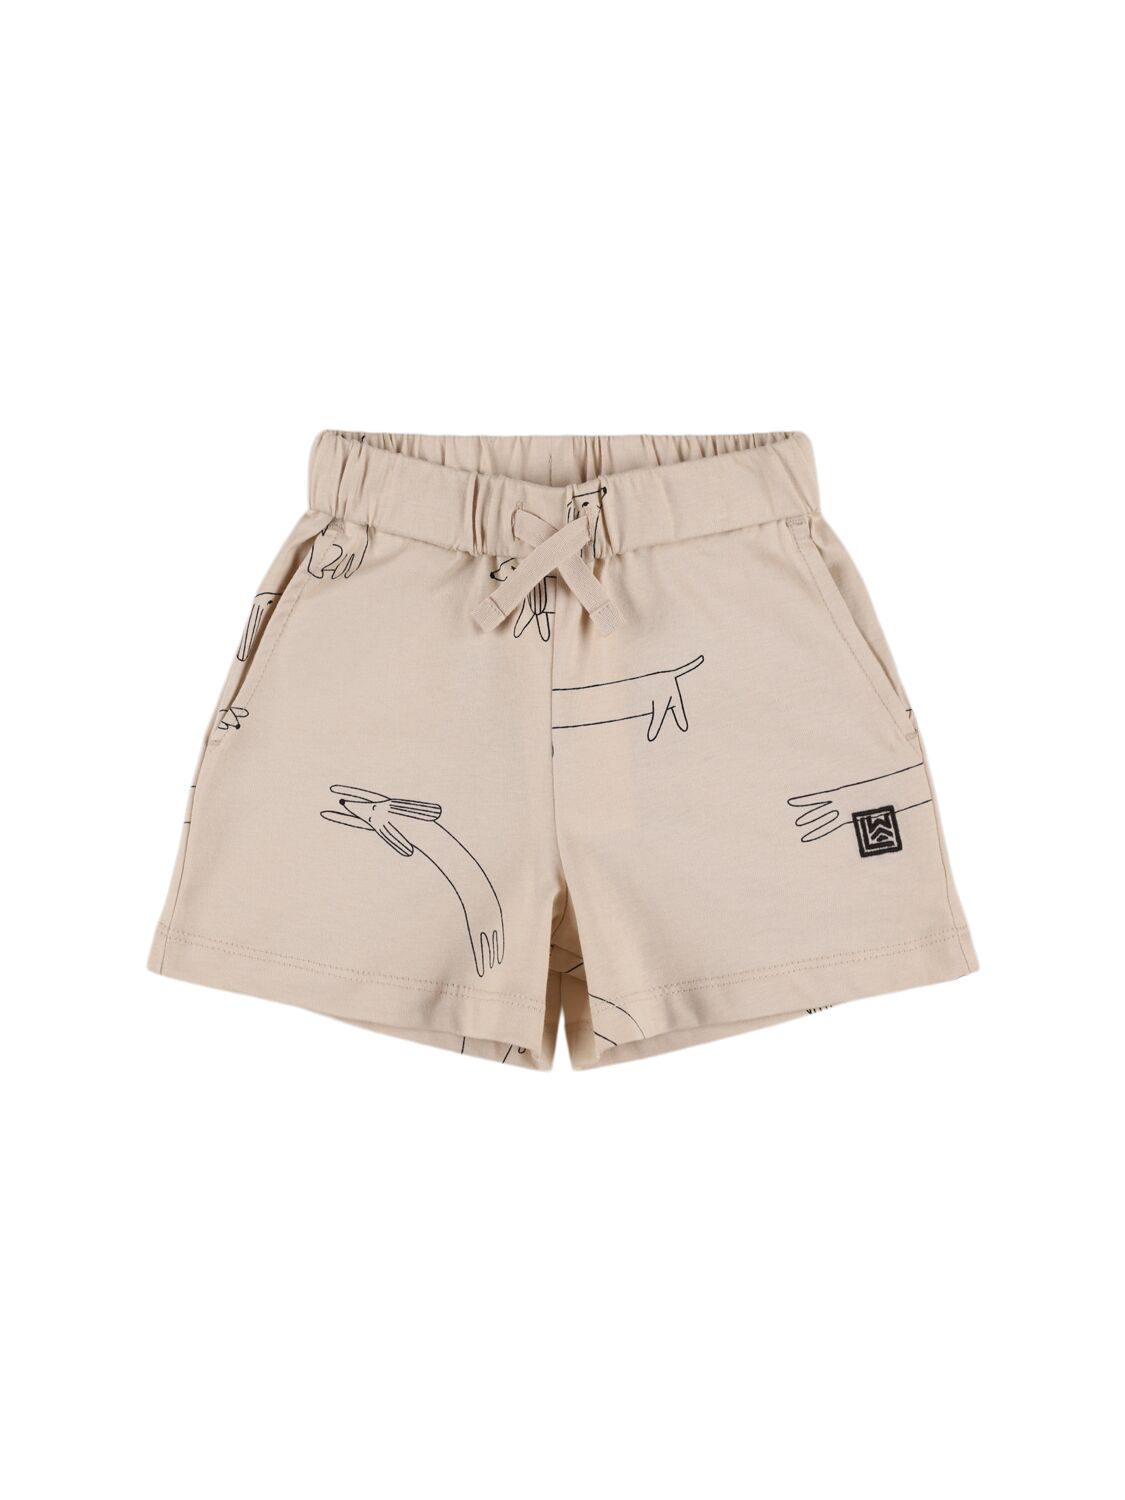 Liewood Kids' Printed Organic Cotton Shorts In Neutral